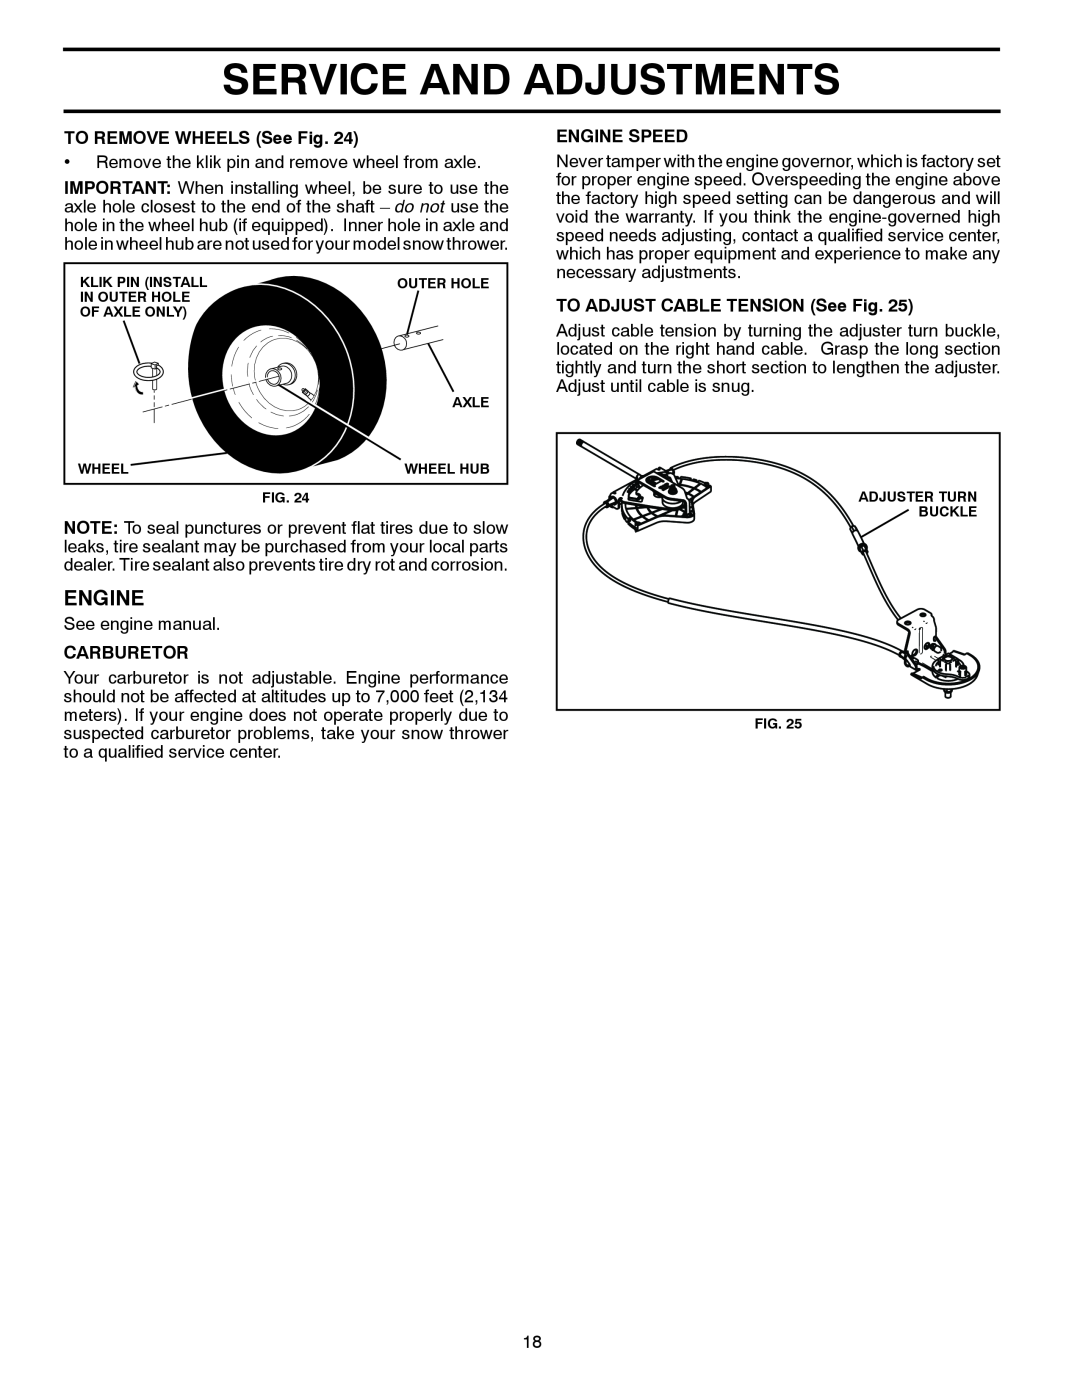 Poulan 435548, 96198002901 owner manual Service And Adjustments, TO REMOVE WHEELS See Fig, Carburetor, Engine Speed 